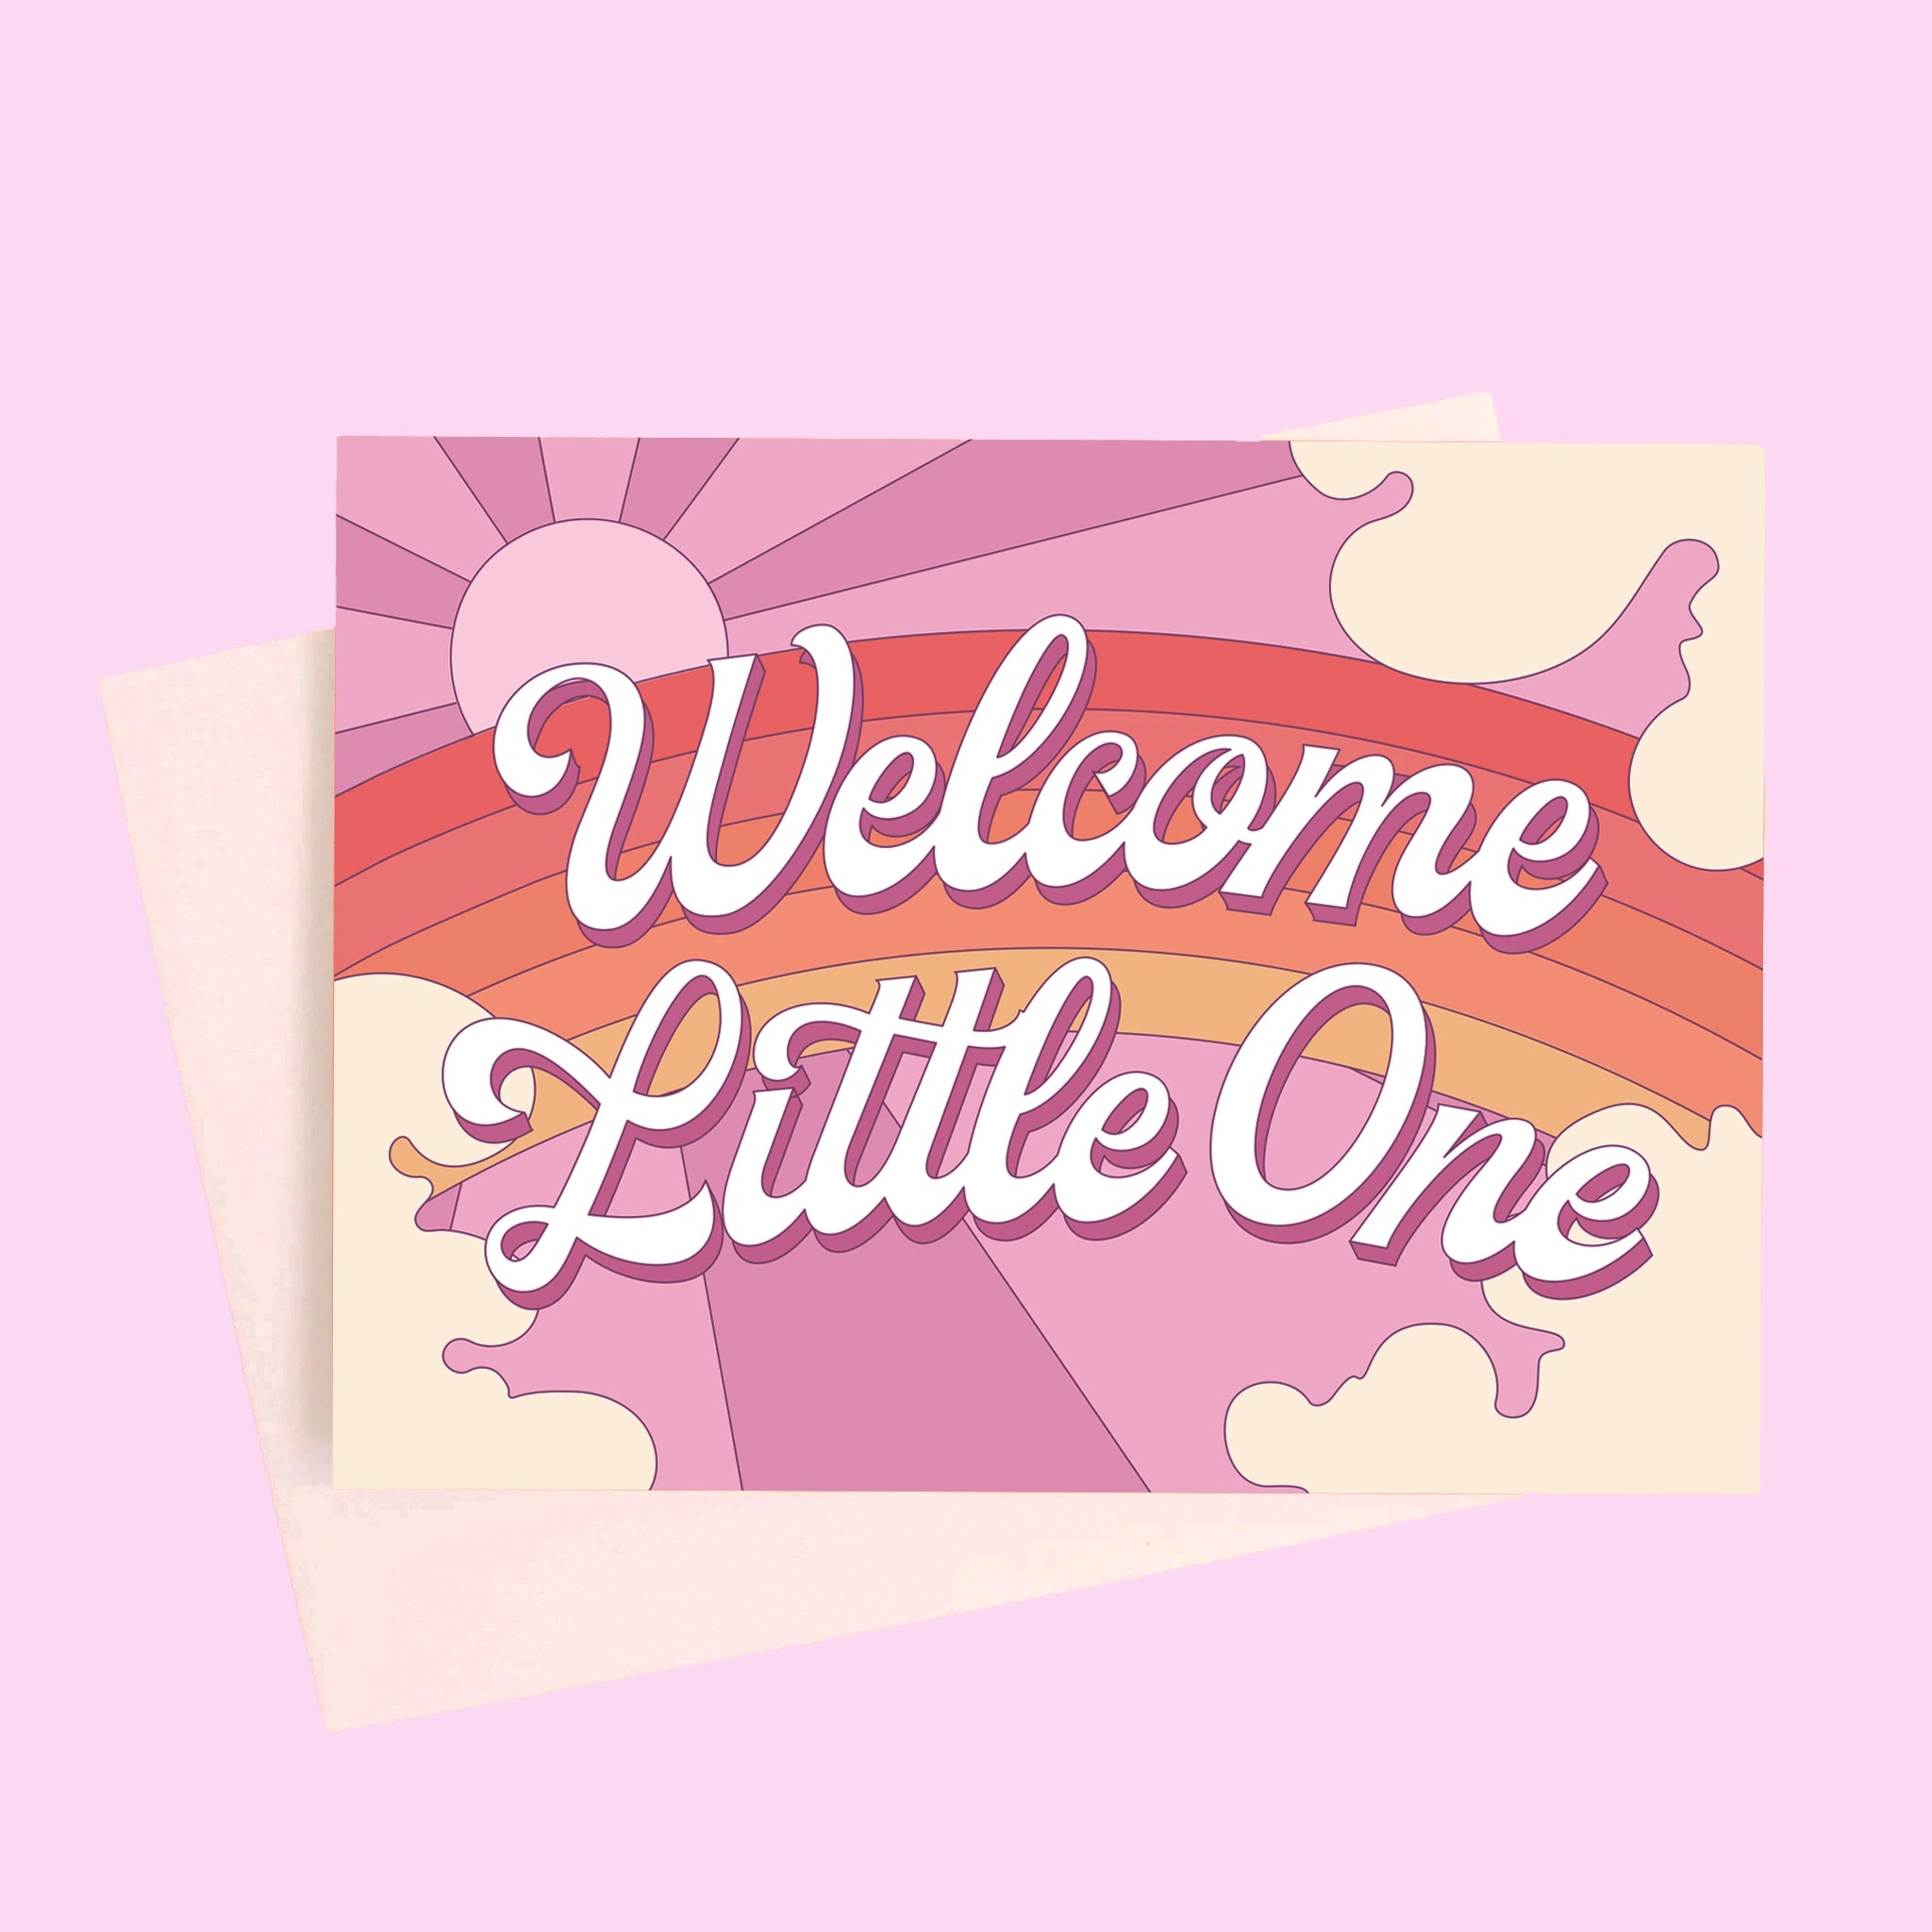 On a light purple background is a greeting card featuring a rainbow and sun graphic and white text in the center that reads, &quot;Welcome Little One&quot;.